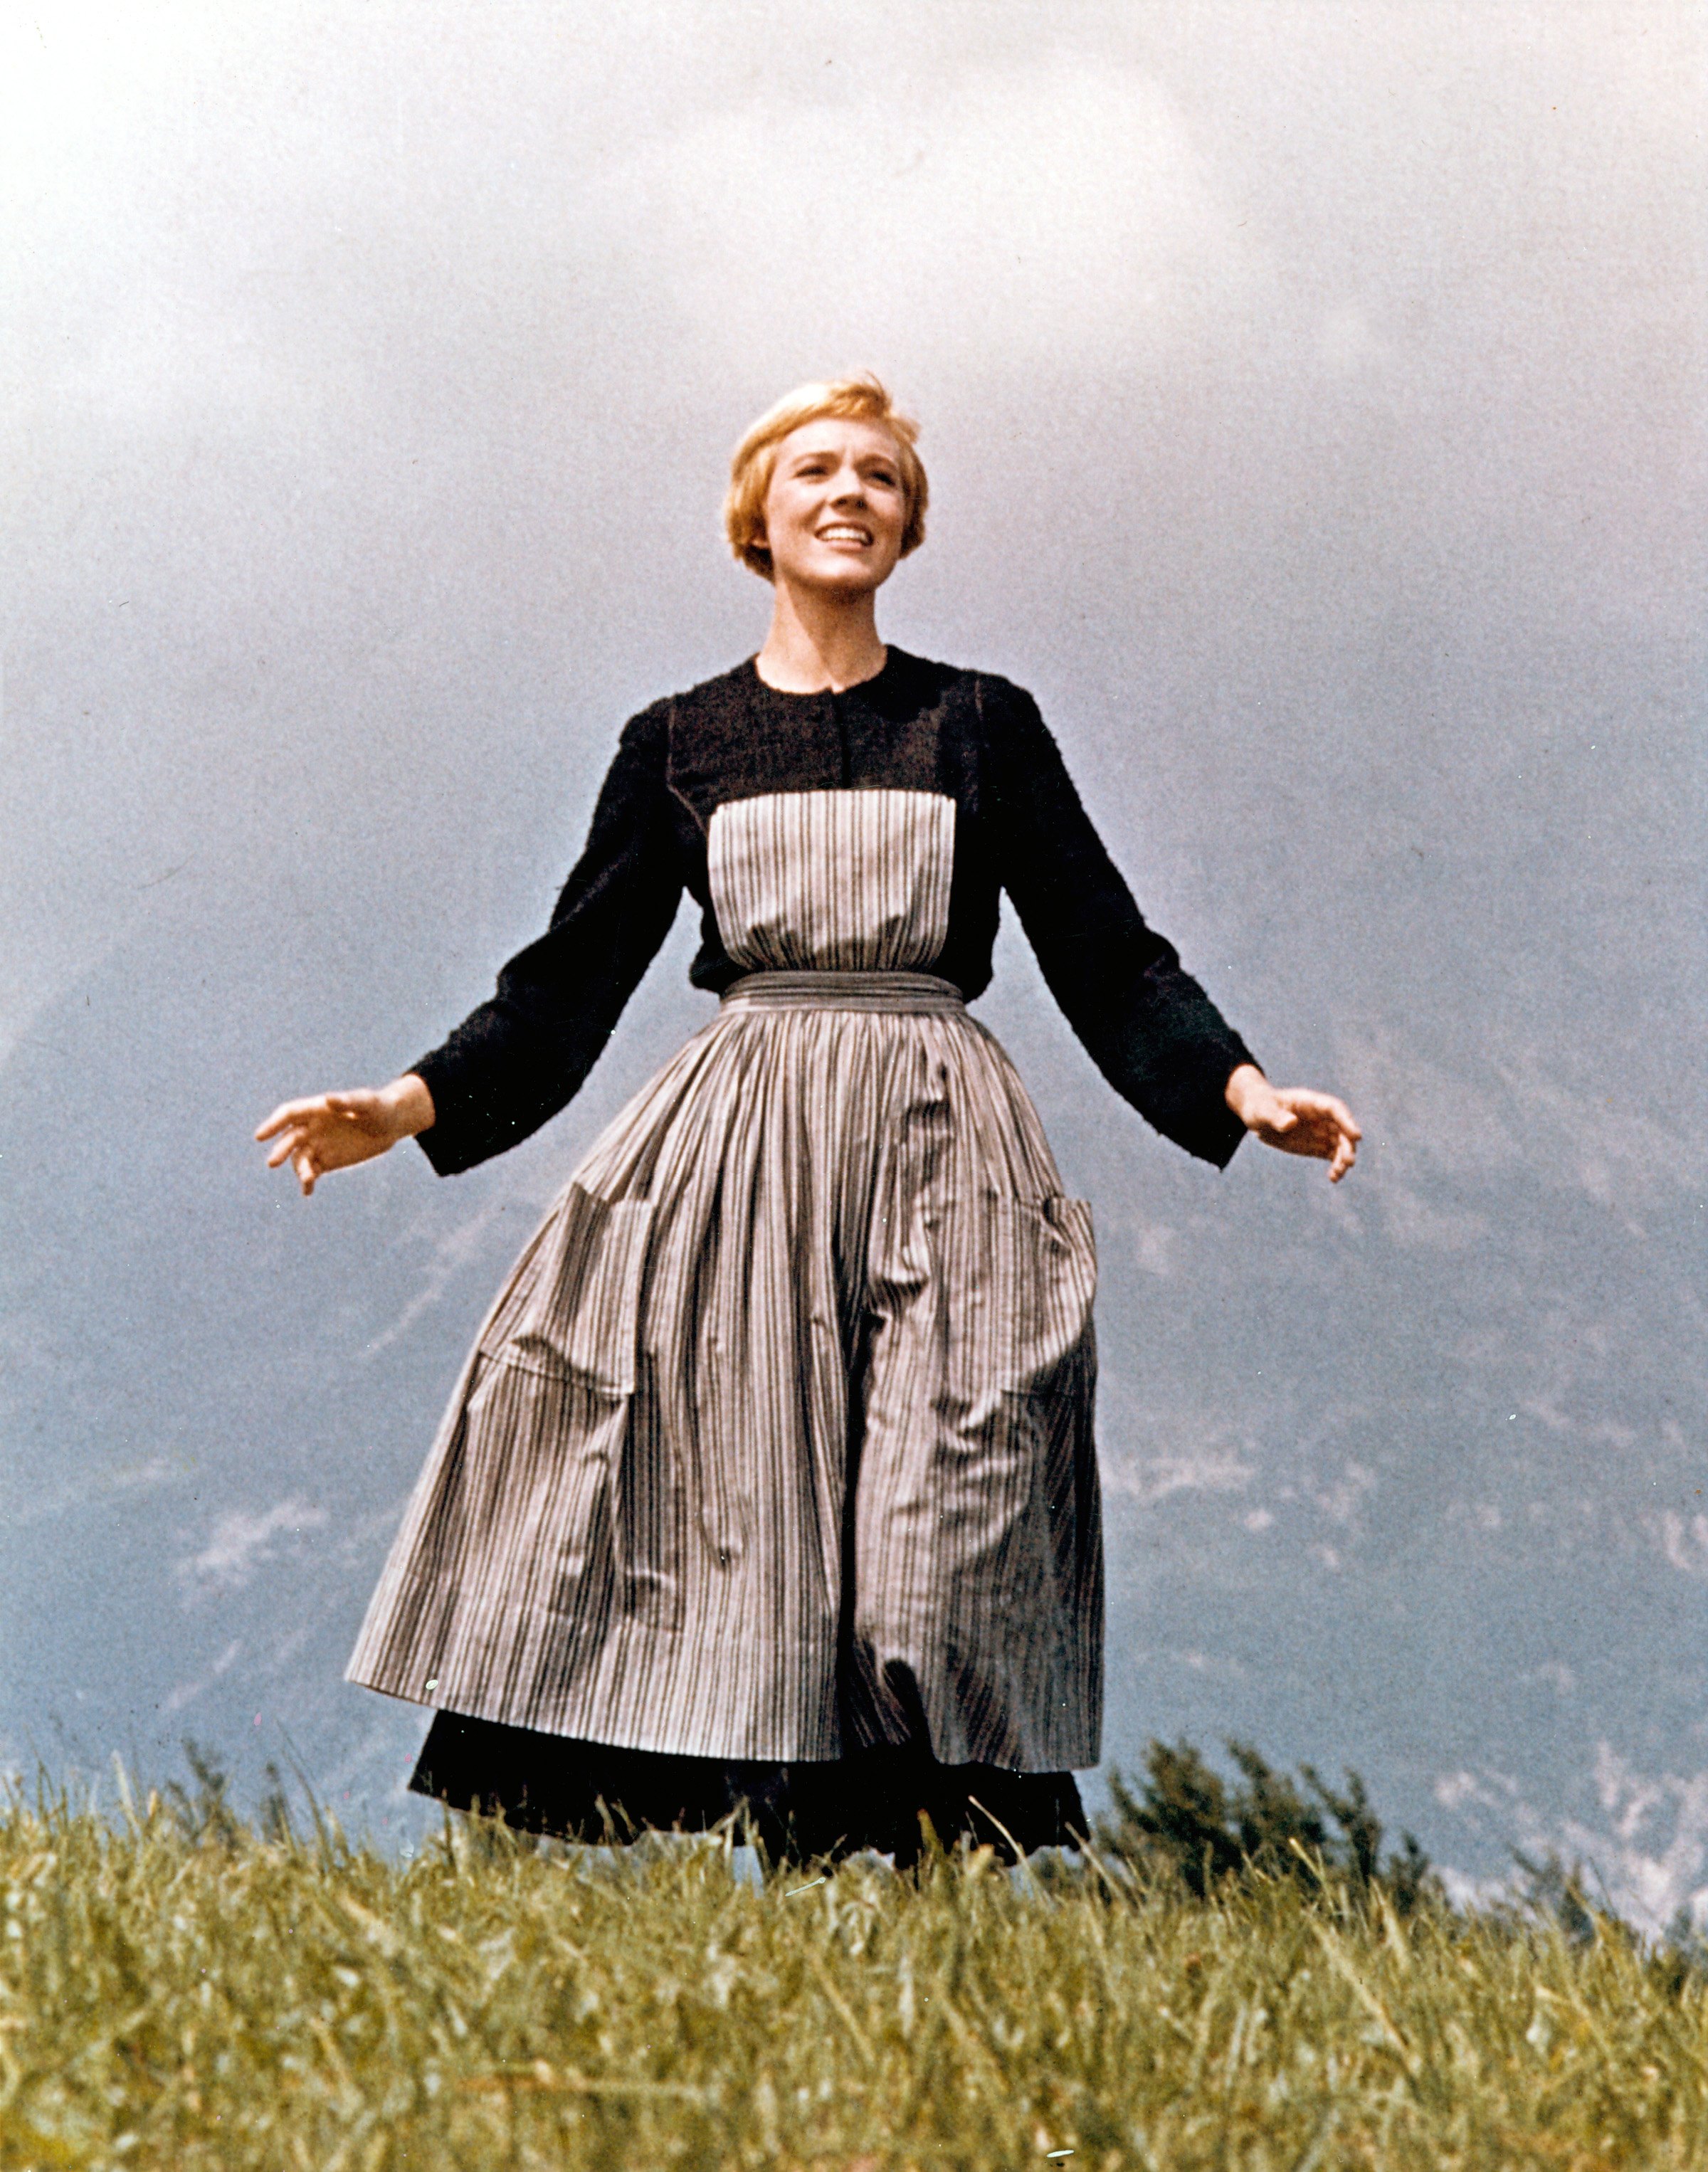 Julie Andrews in "Sound Of Music" - 20th Century Fox - Released March 2, 1965